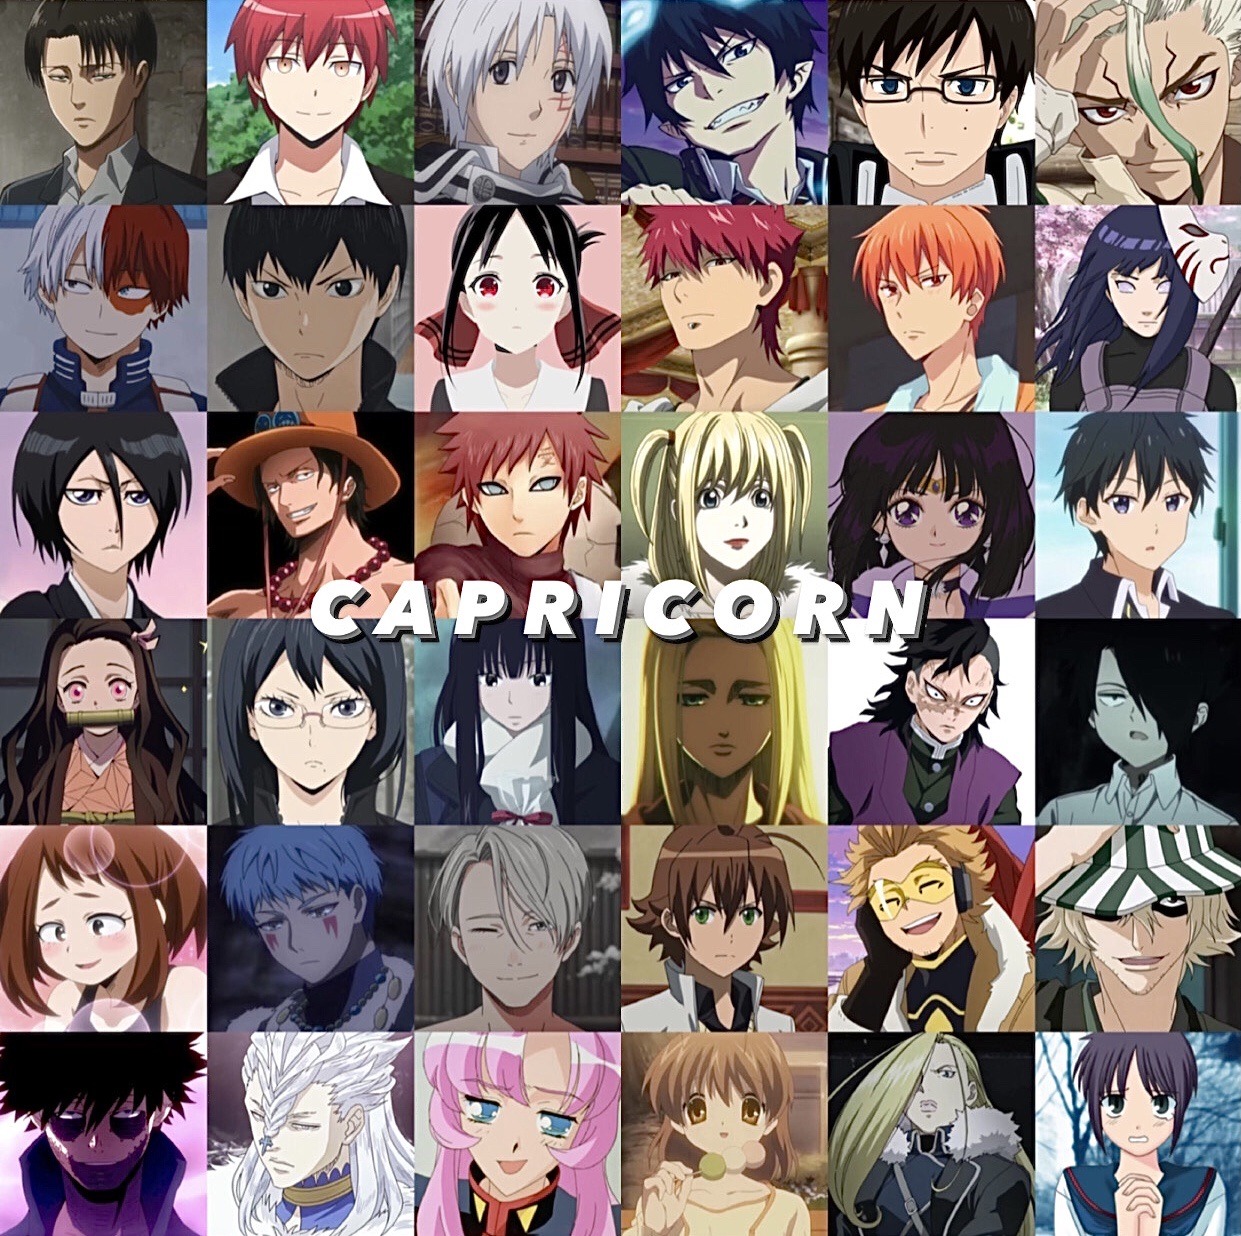 20 Best Capricorn Anime Characters Ranked by Popularity